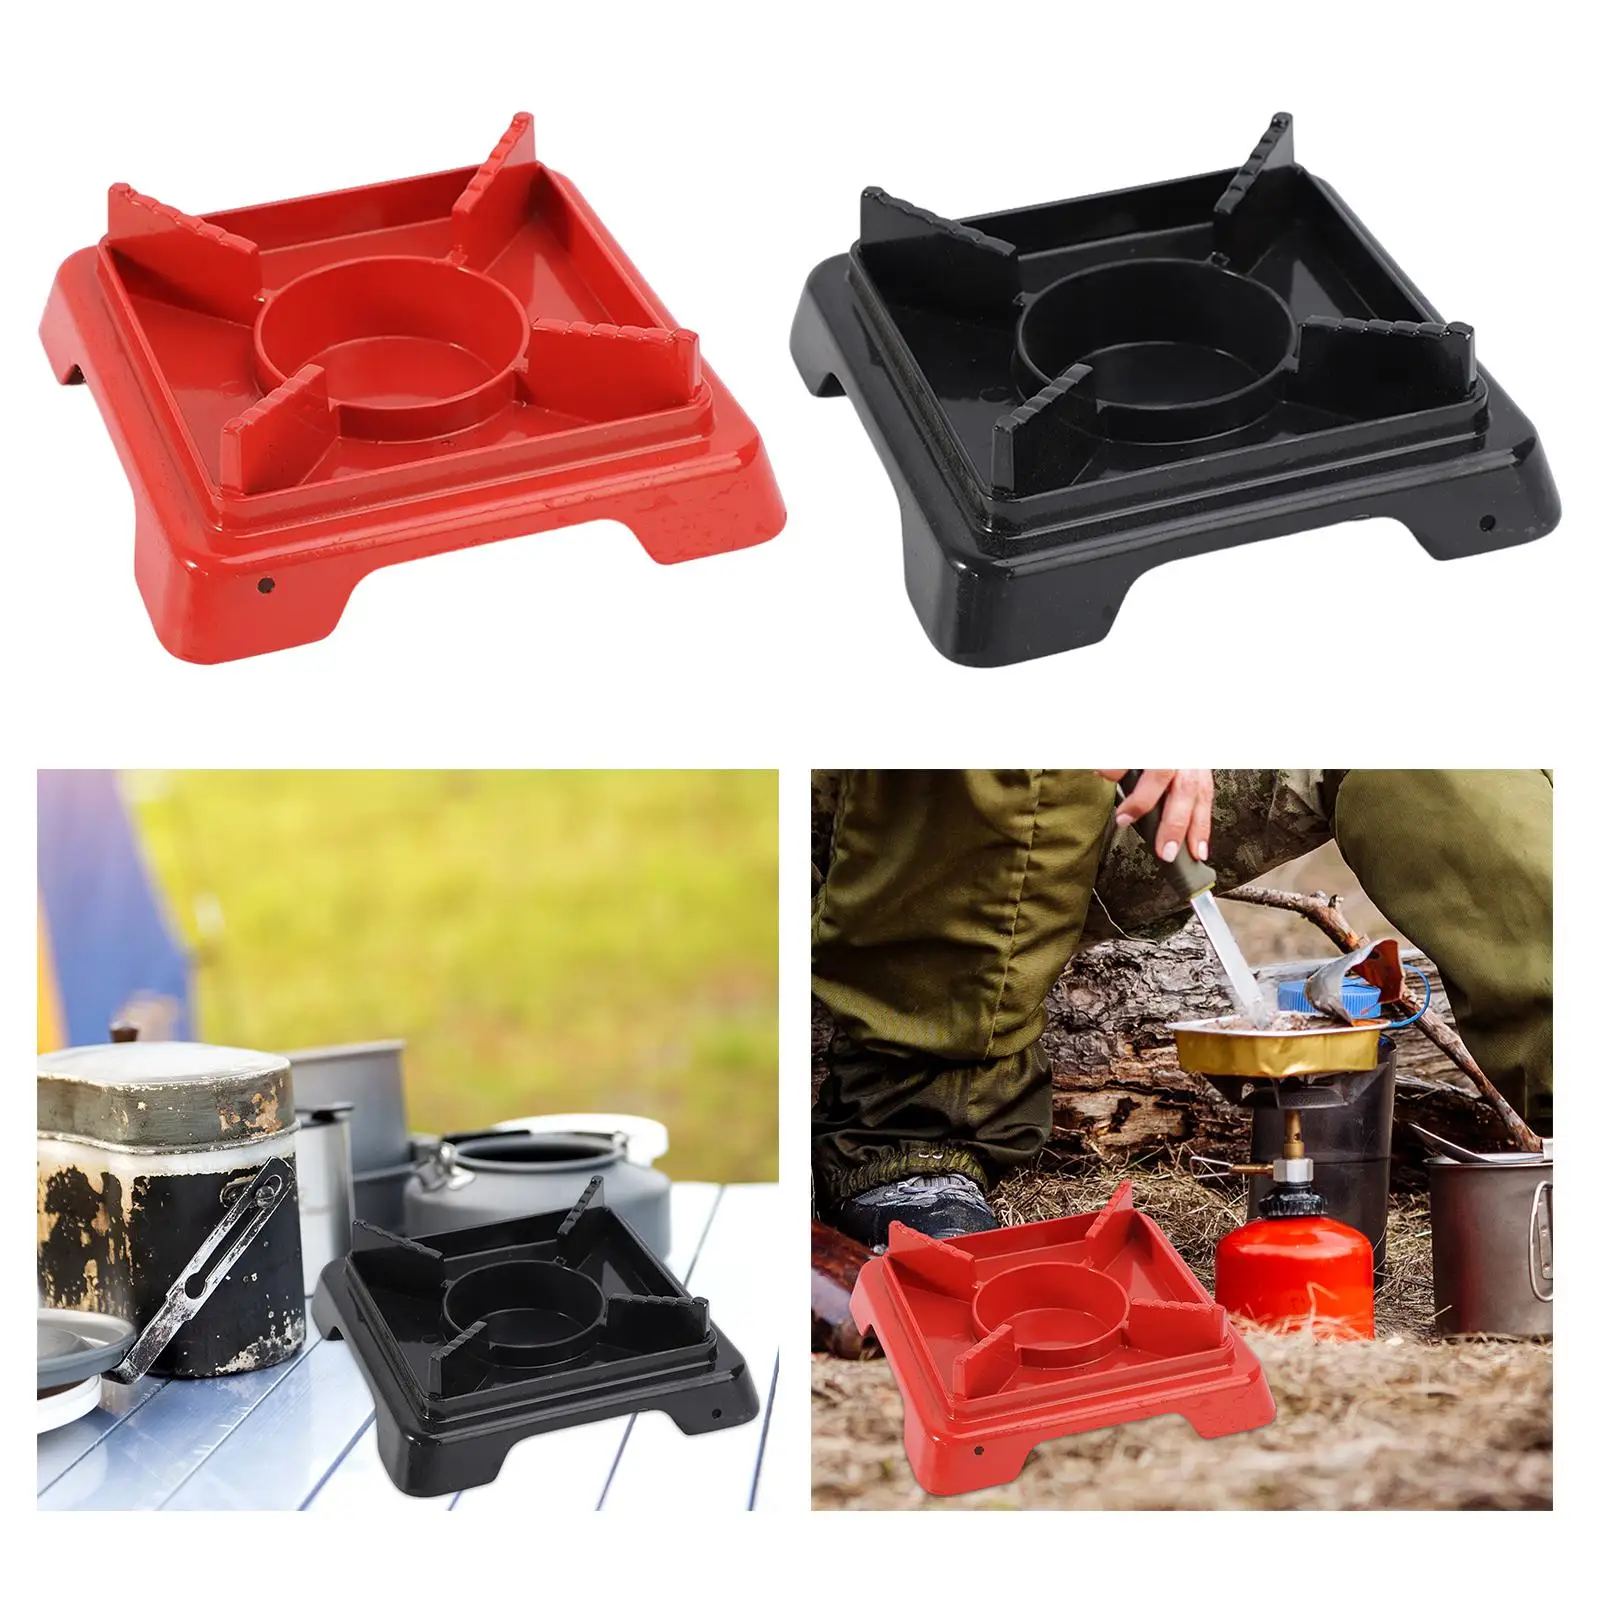 Camping Alcohol Stove Lightweight Food Heater Universal Cooking Tool for Outside Activities Travel Barbecue Hiking